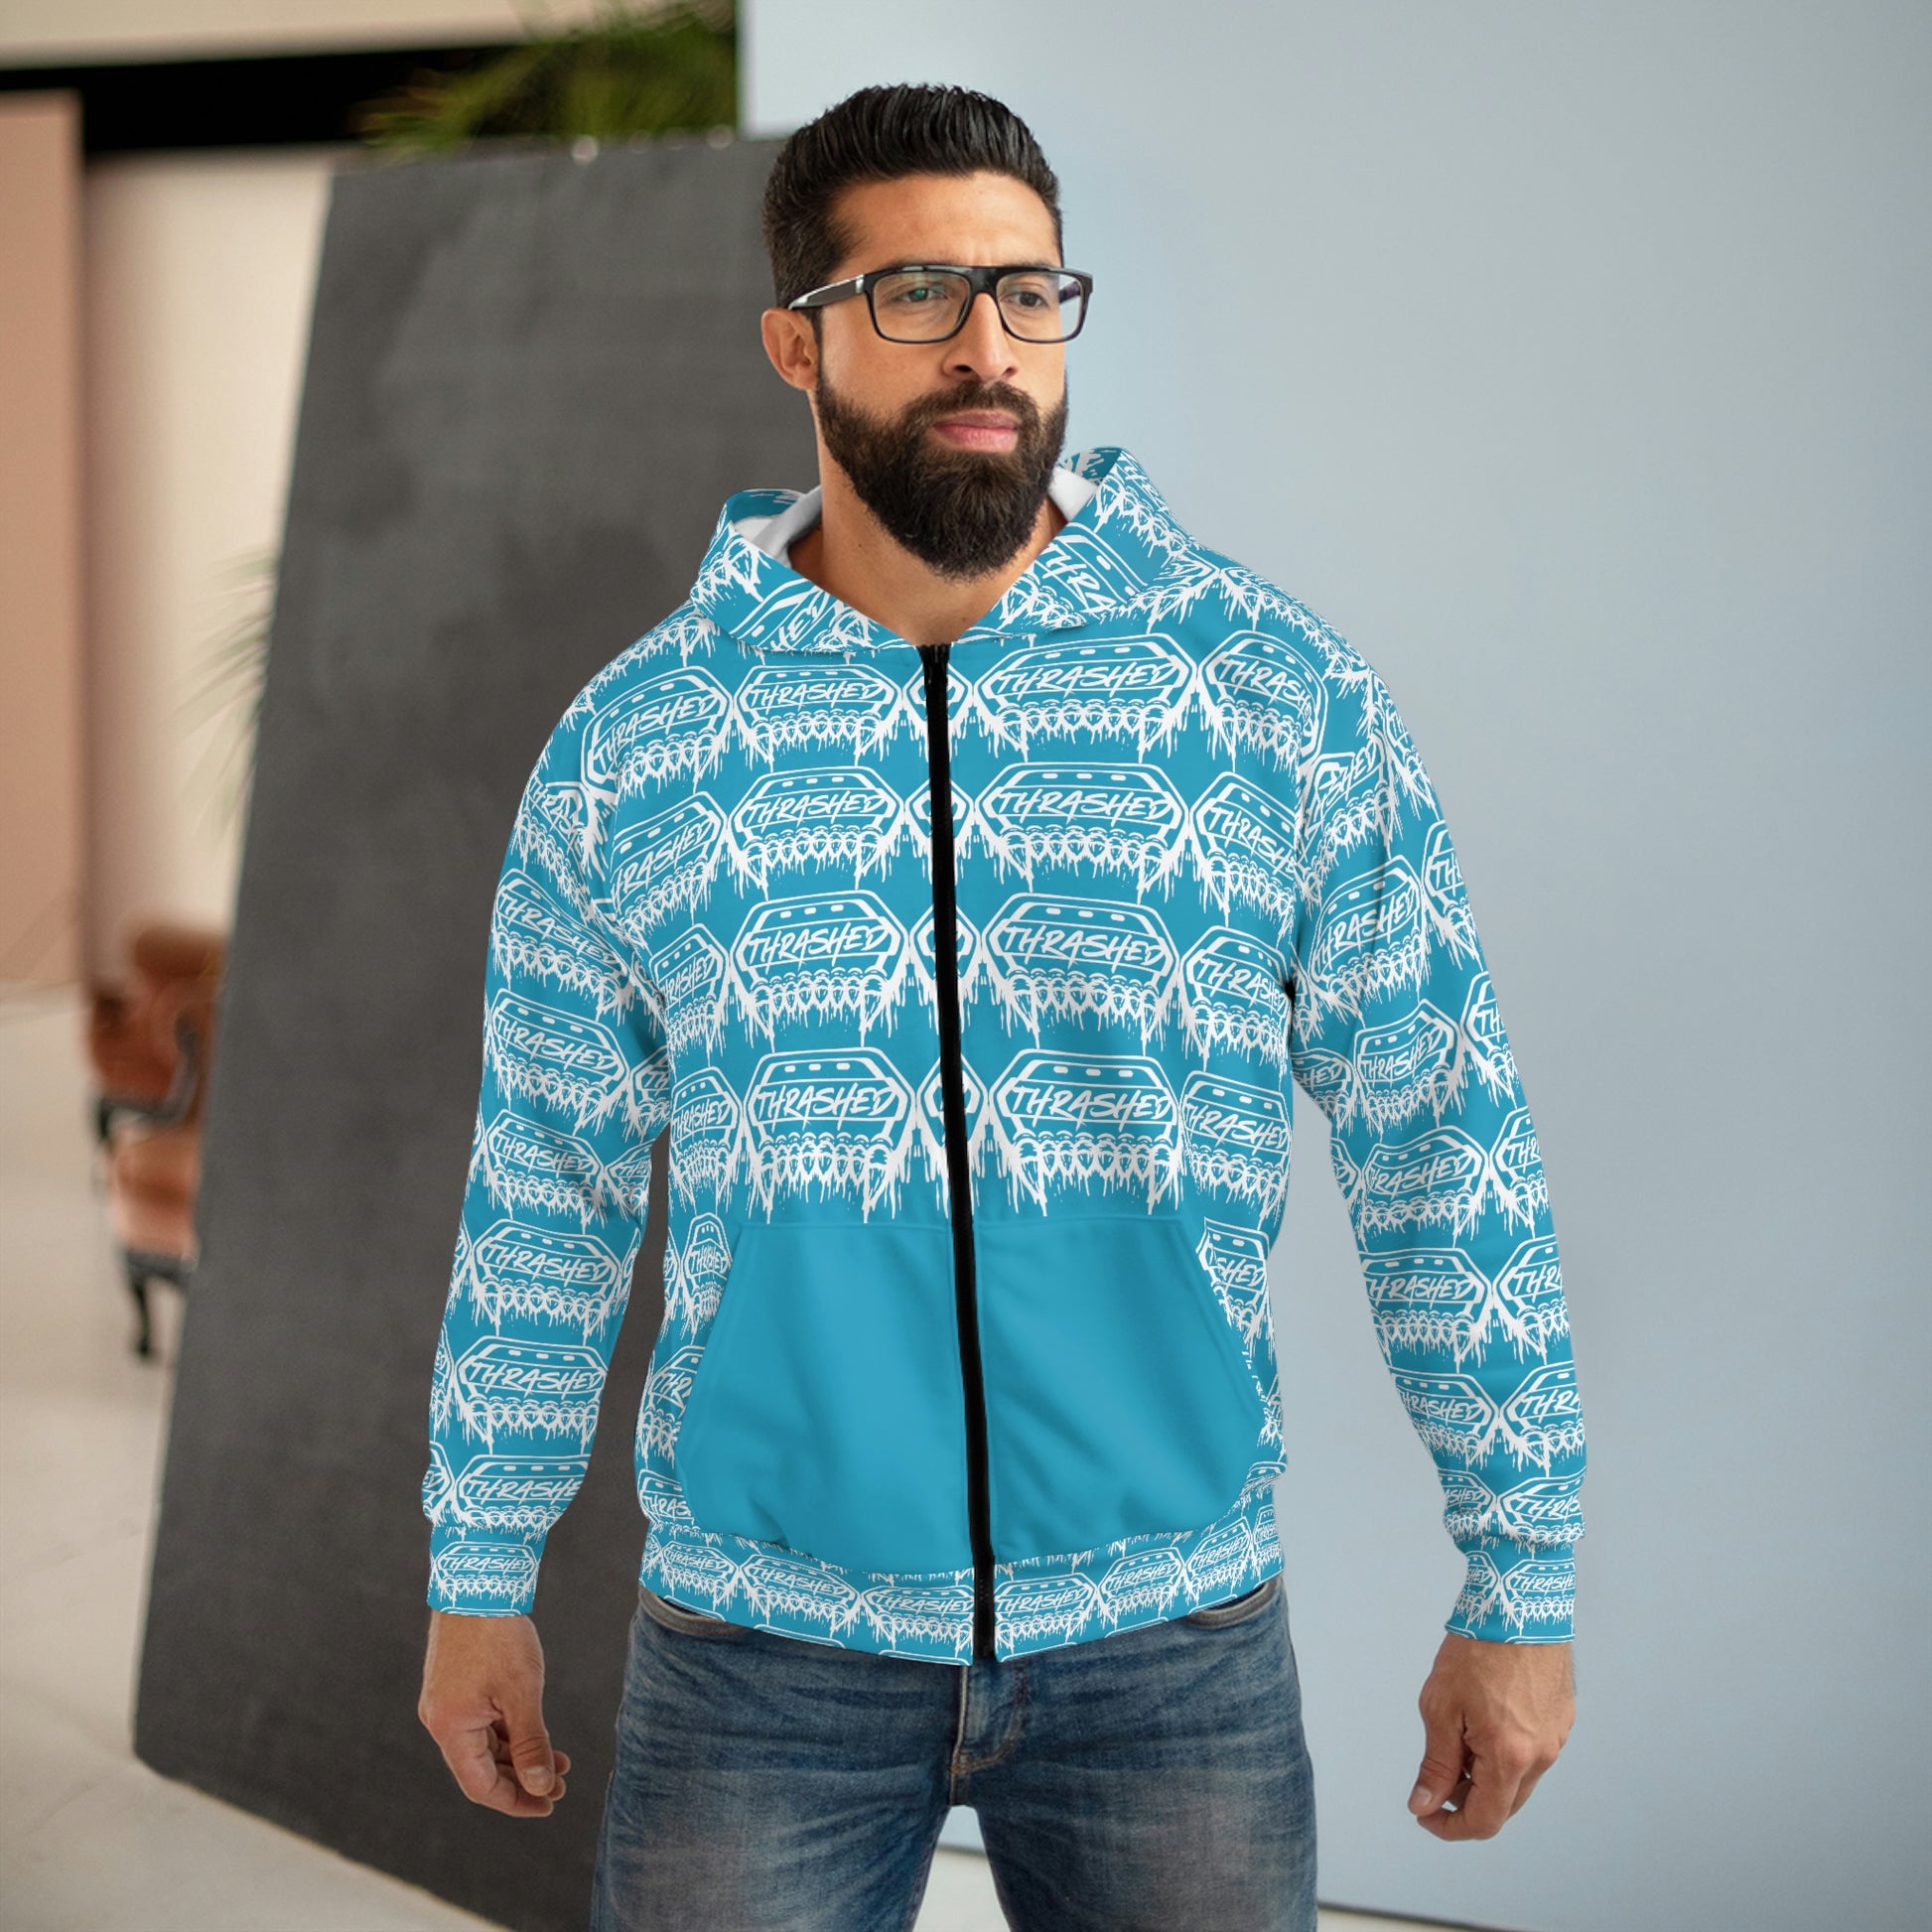 Limited Edition Thrashed Off-Road Unleash The Beast Turquoise Hoodie - Mid-Atlantic Off-Roading